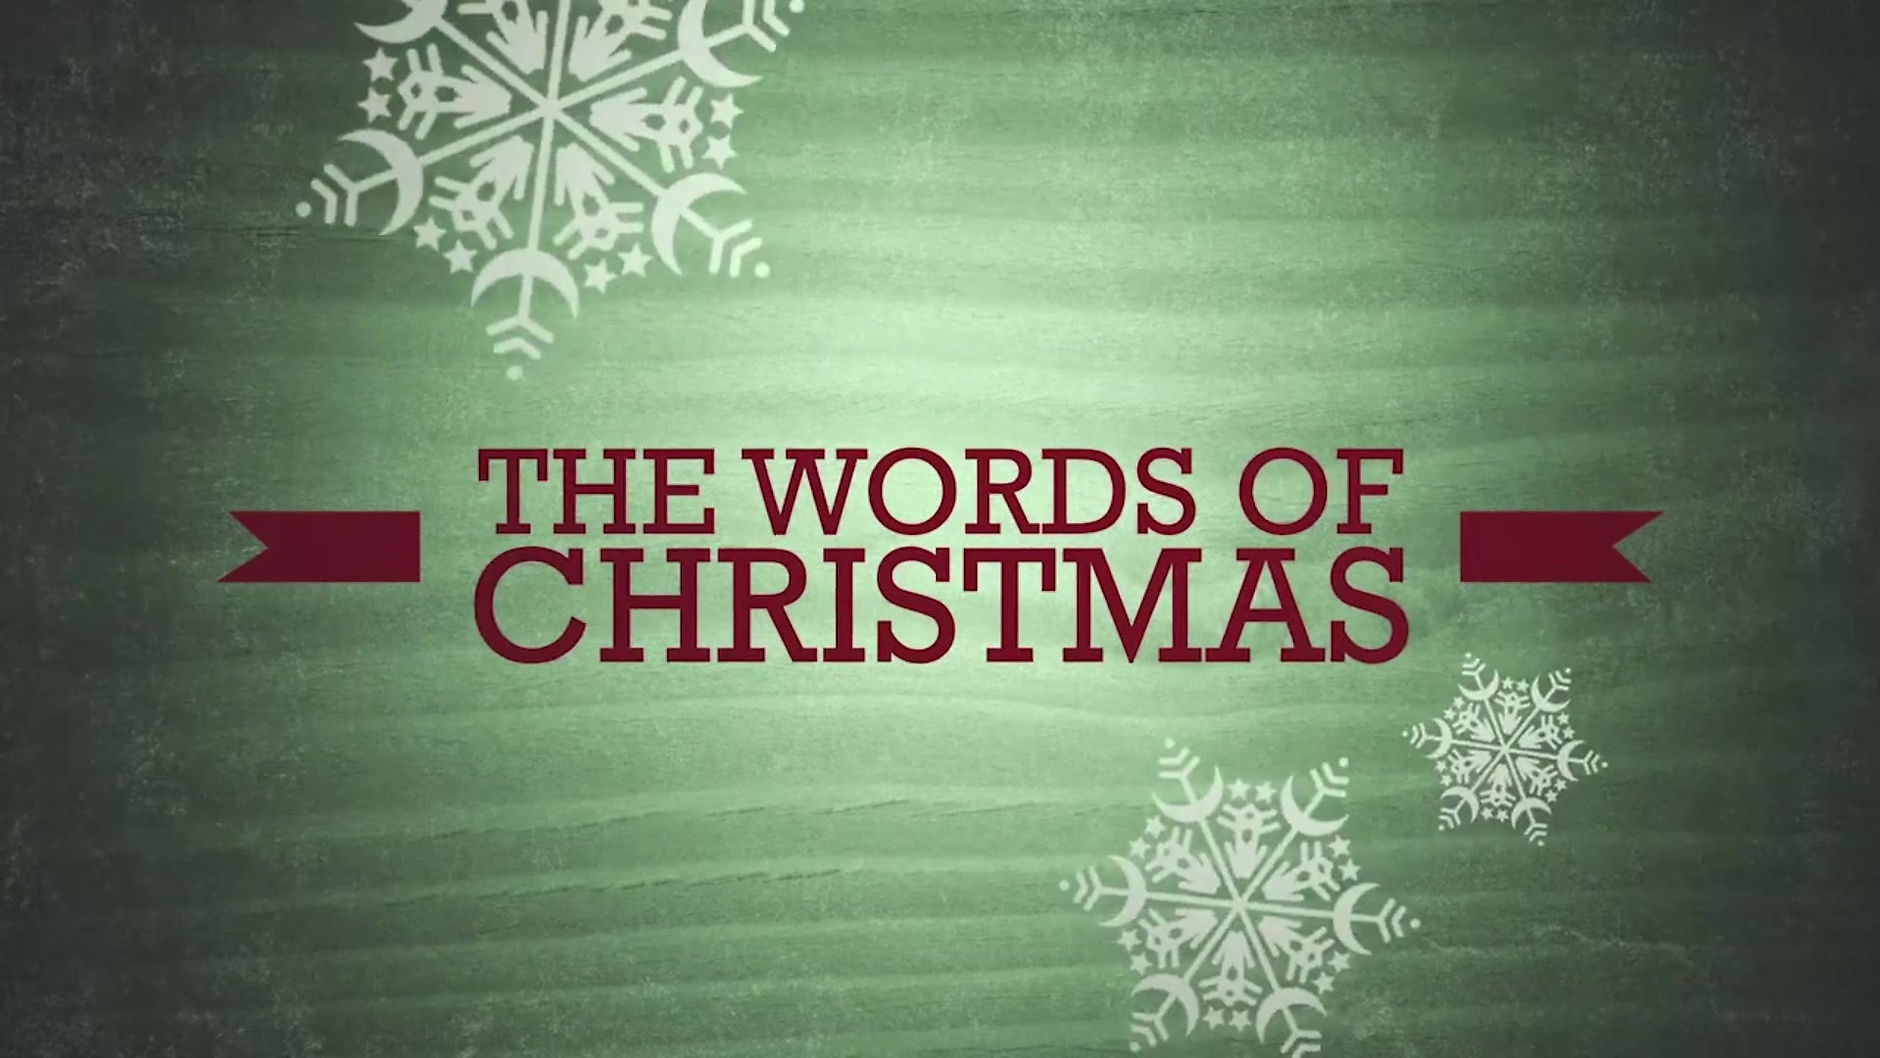 THE WORDS OF CHRISTMAS